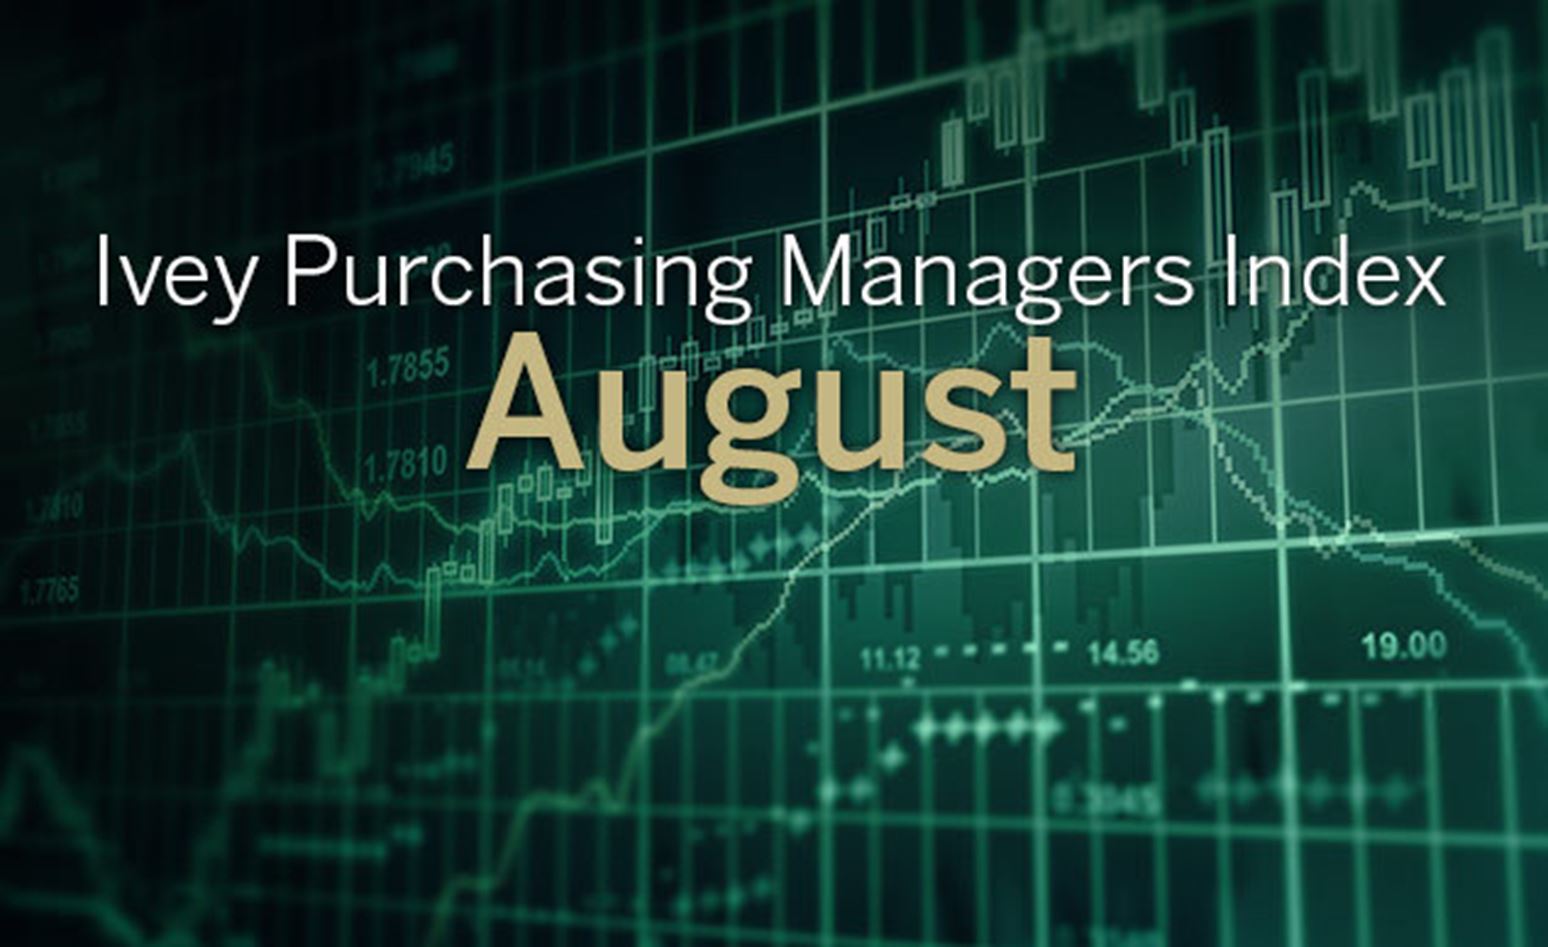 PMI-august